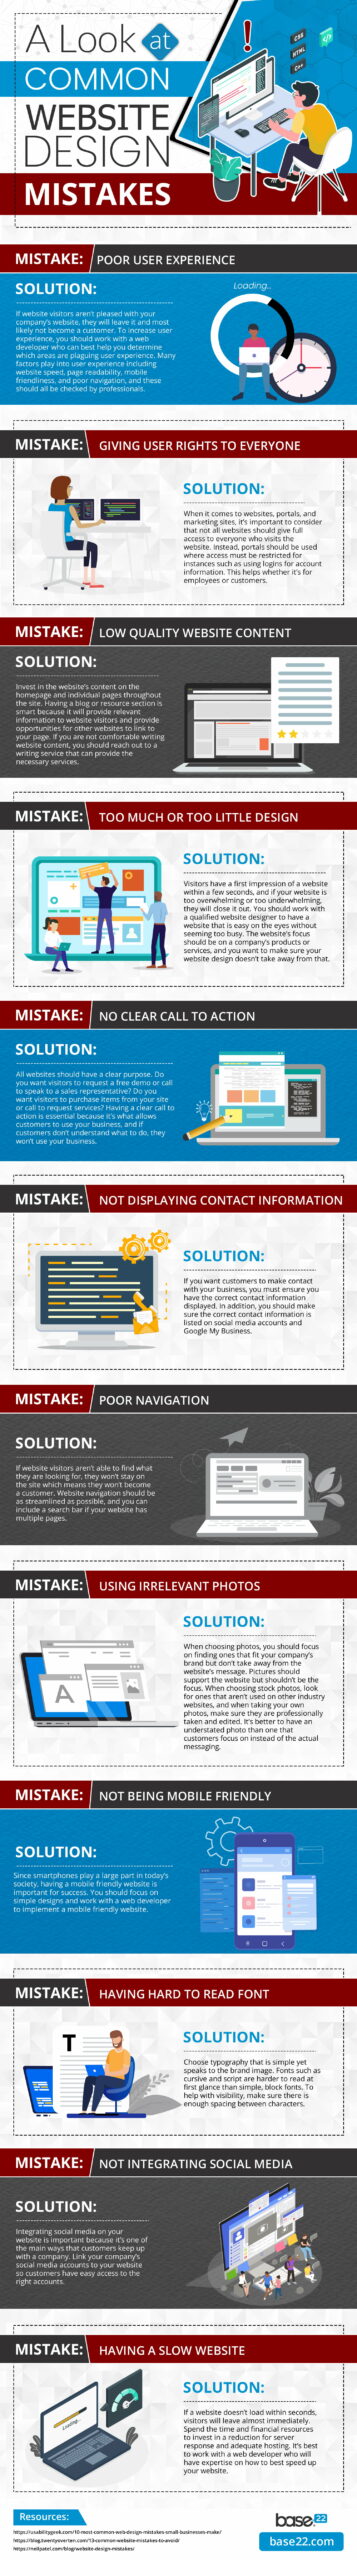 A Look at Common Website Design Mistakes